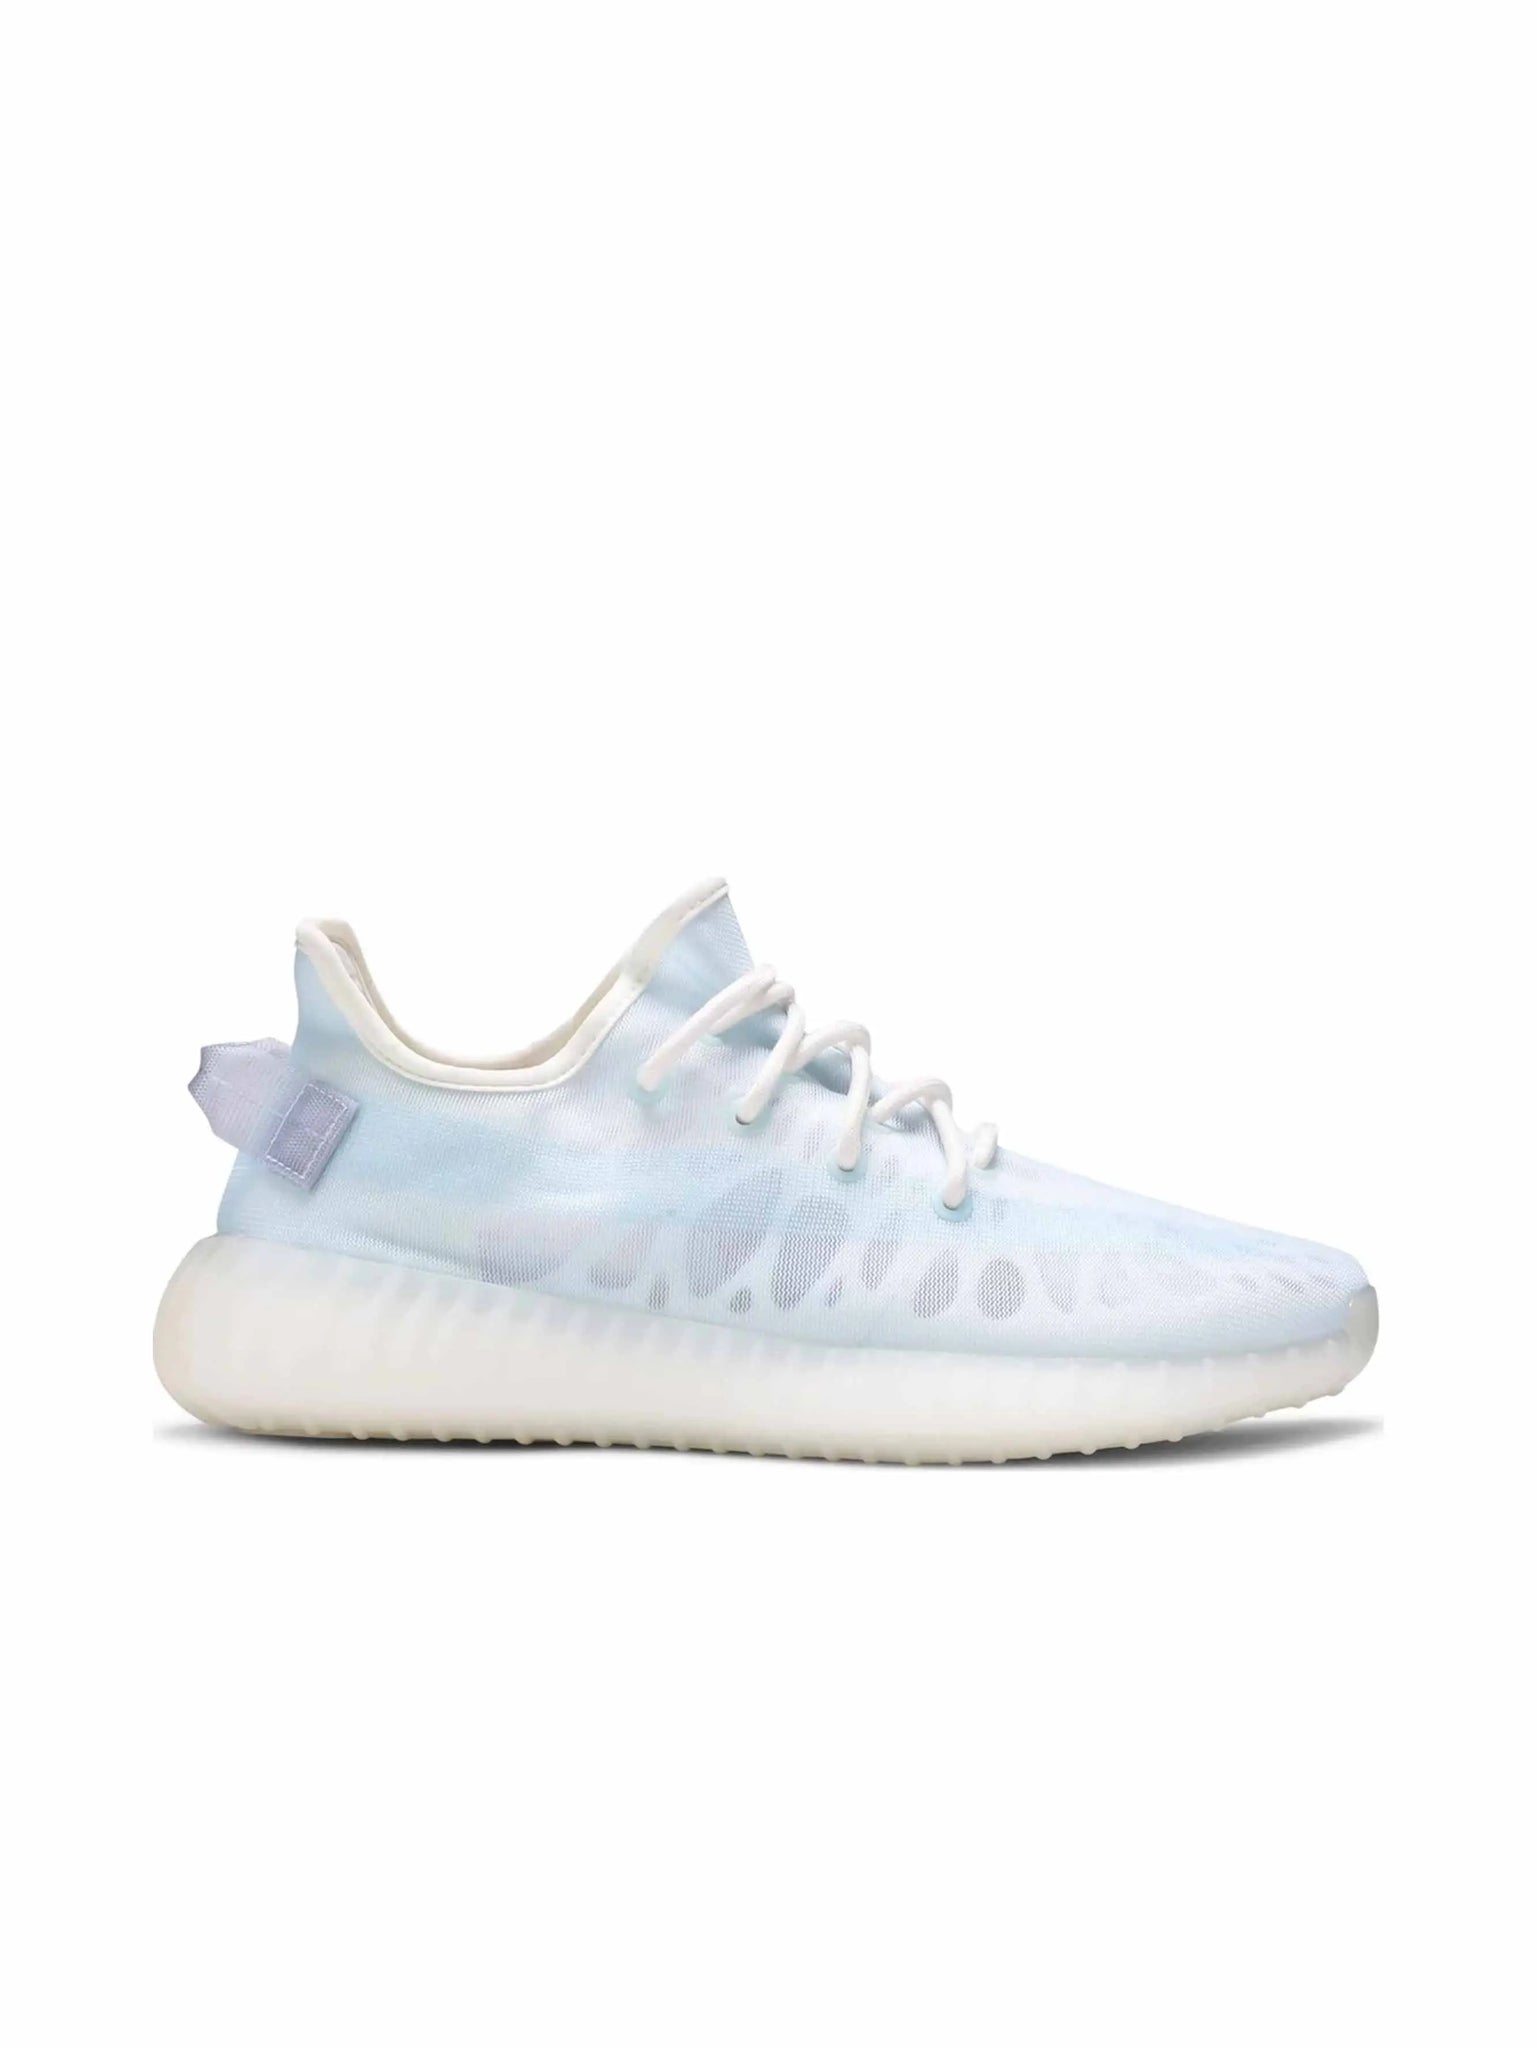 adidas Yeezy Boost 350 V2 Mono Ice in Auckland, New Zealand - Shop name